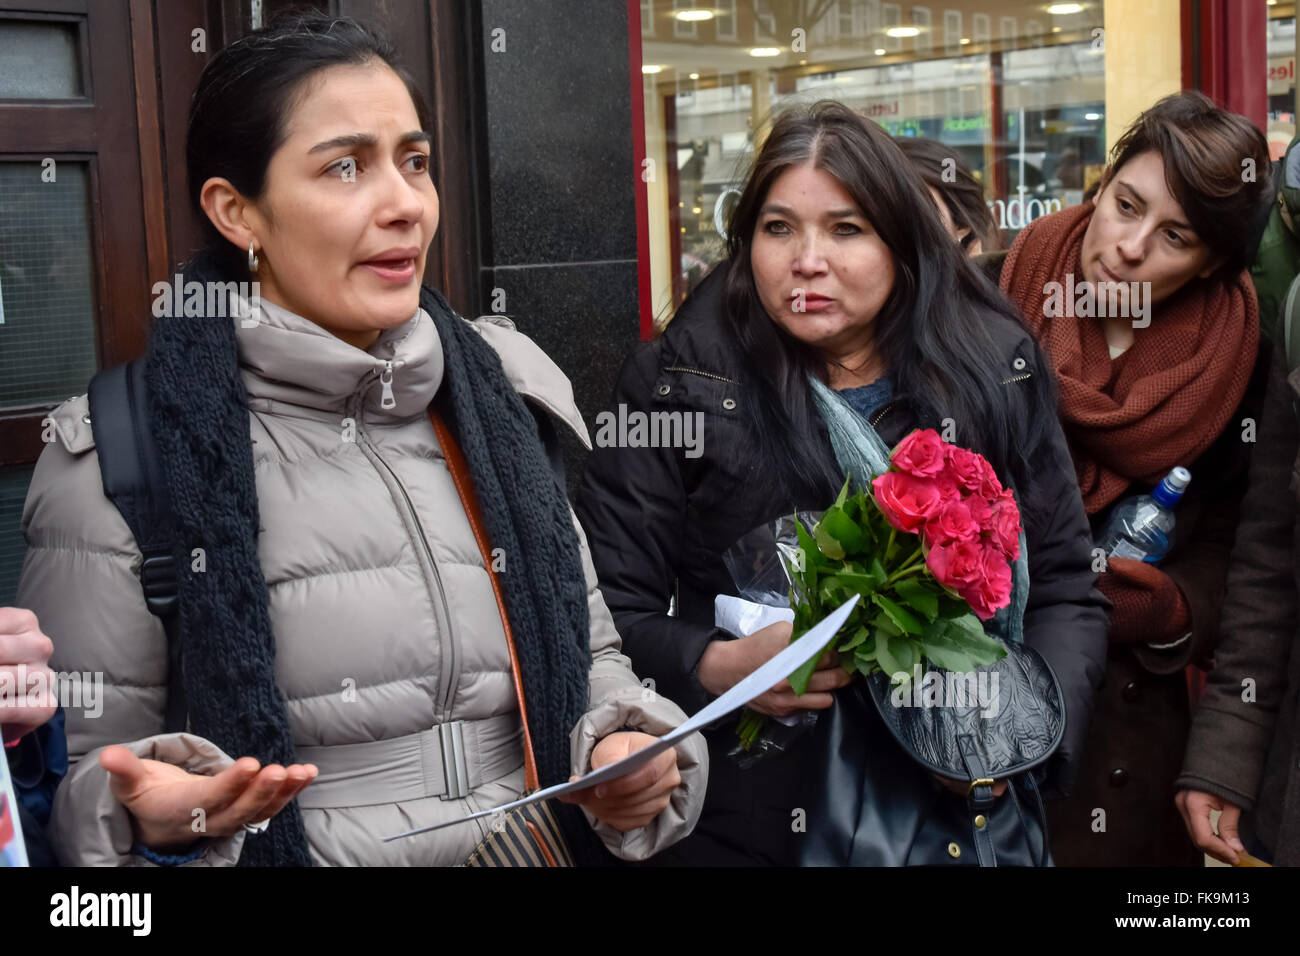 London, UK. 7th March, 2016. One of the two who went in to take a letter to the Honduran Charge d'Affaires calling for an international inquiry into the murder of environmental activist Berta Cáceres, leader of the Civic Council of Popular and Indigenous Organisations of Honduras (COPINH) in her home on March 3 reports back to the people at the vigil on the pavement outside. Peter Marshall/Alamy Live News Stock Photo